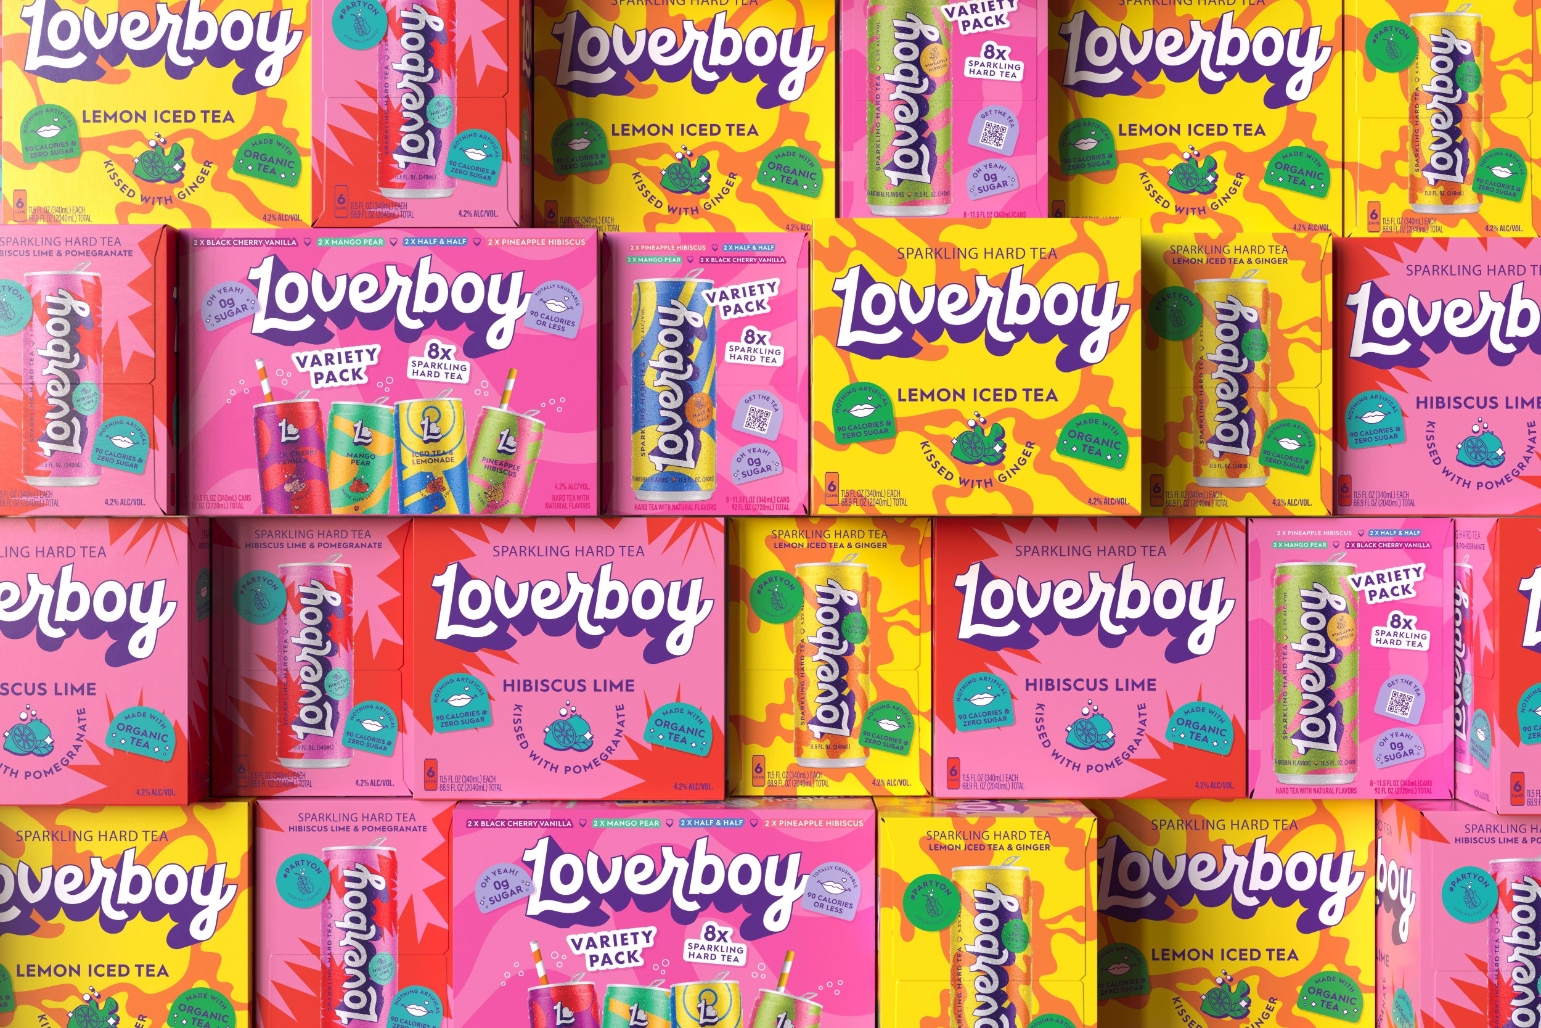 Loverboy: Spreading the Loverboy